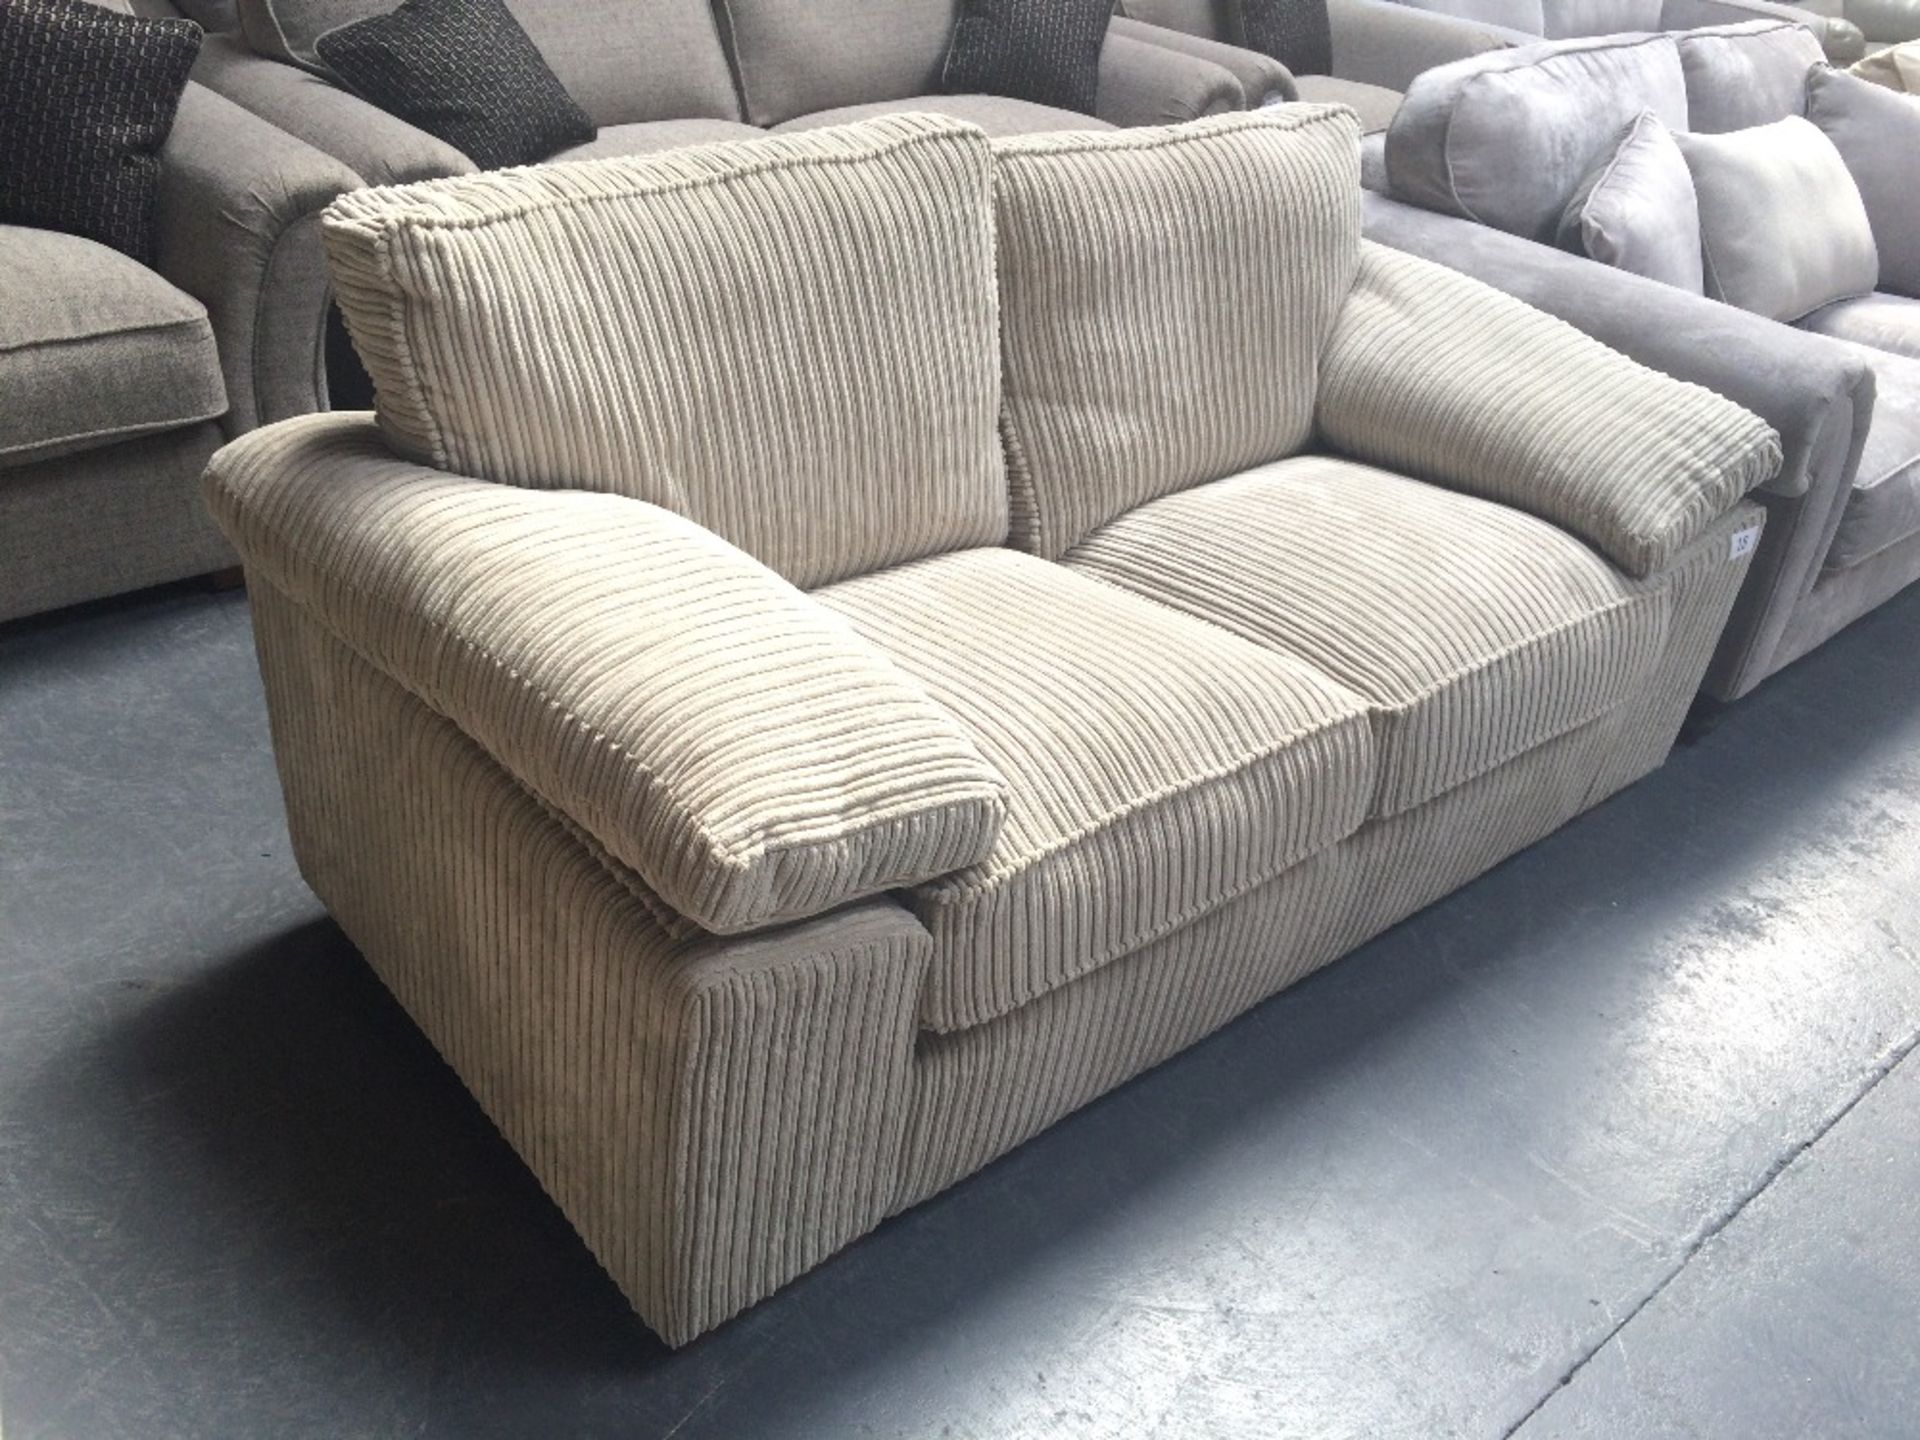 Beige Upholstered Two Seater Sofa - Image 2 of 3